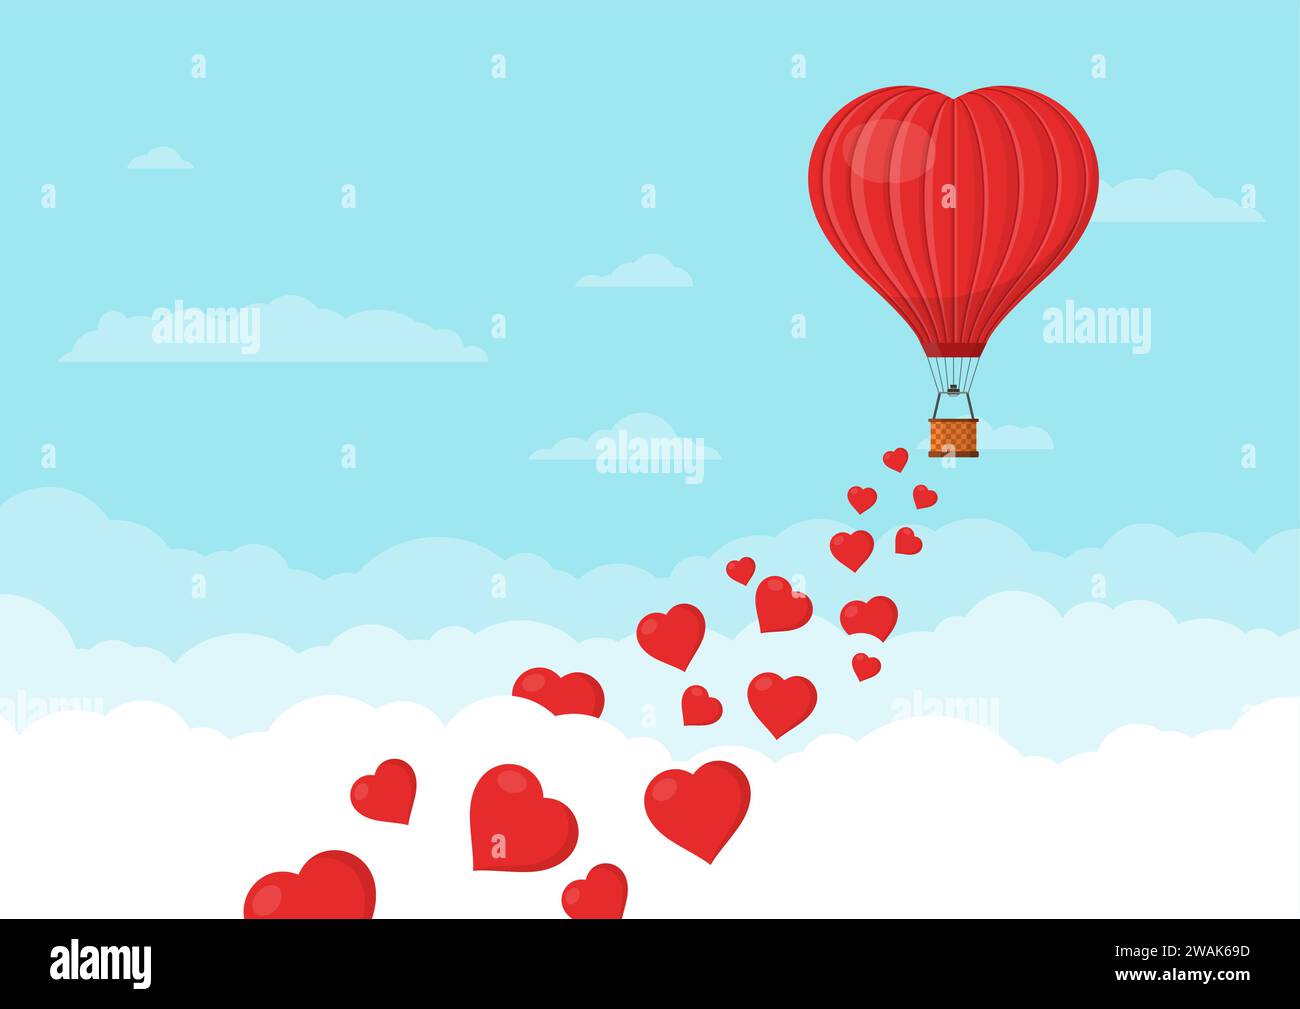 Red heart air balloons flying in the blue sky with clouds. Saint Valentine's day greeting card. Hot air balloon shape of a heart with basket. Vector i Stock Vector